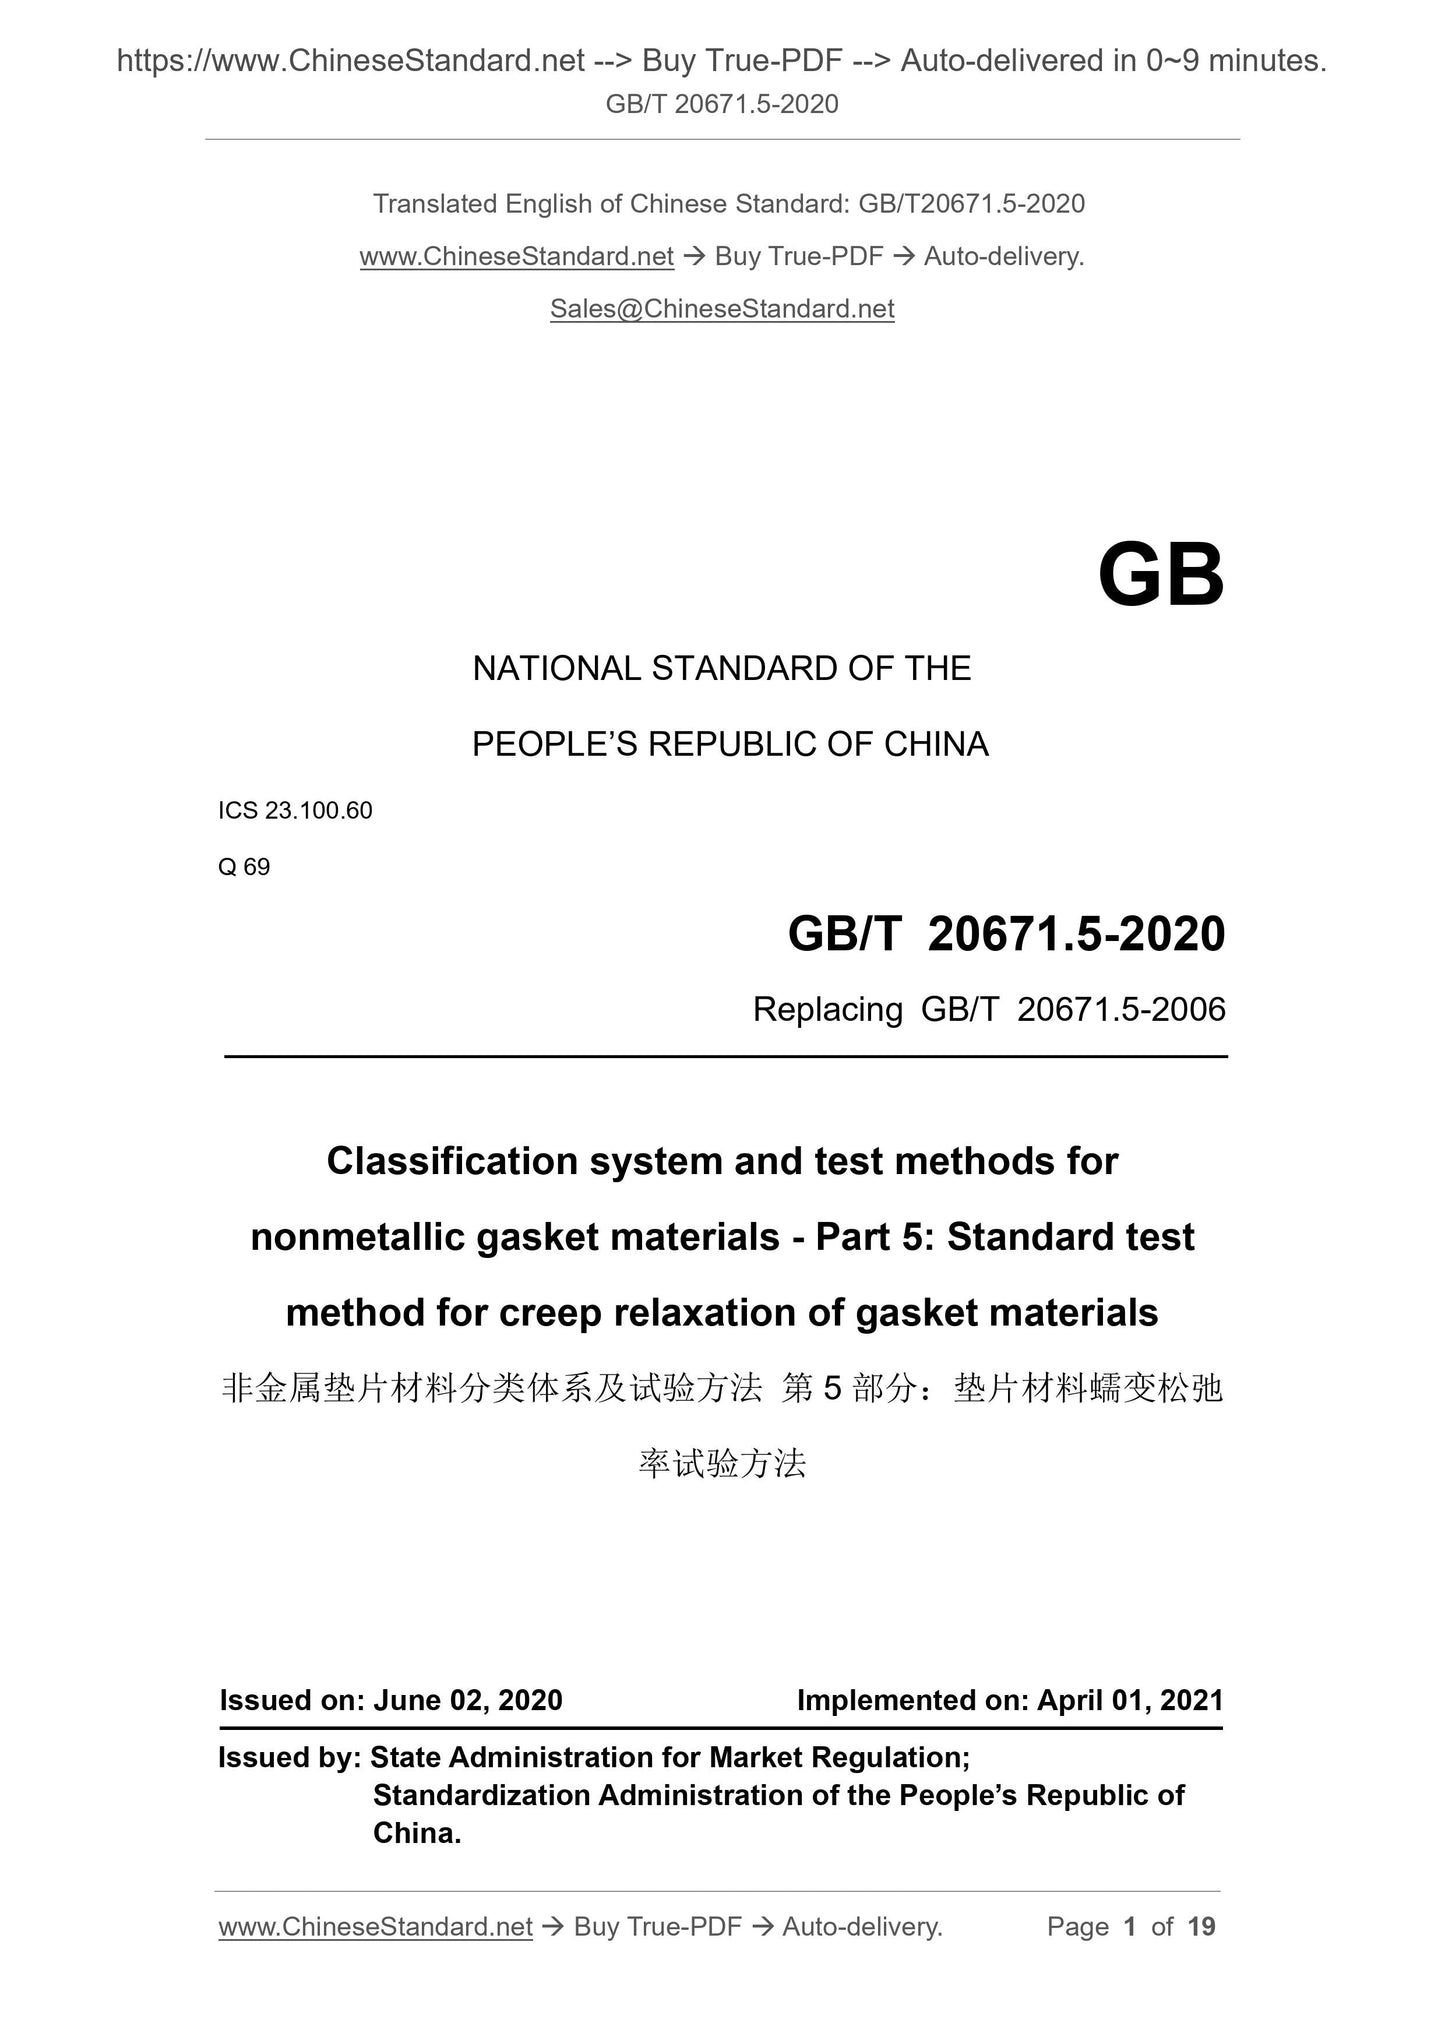 GB/T 20671.5-2020 Page 1